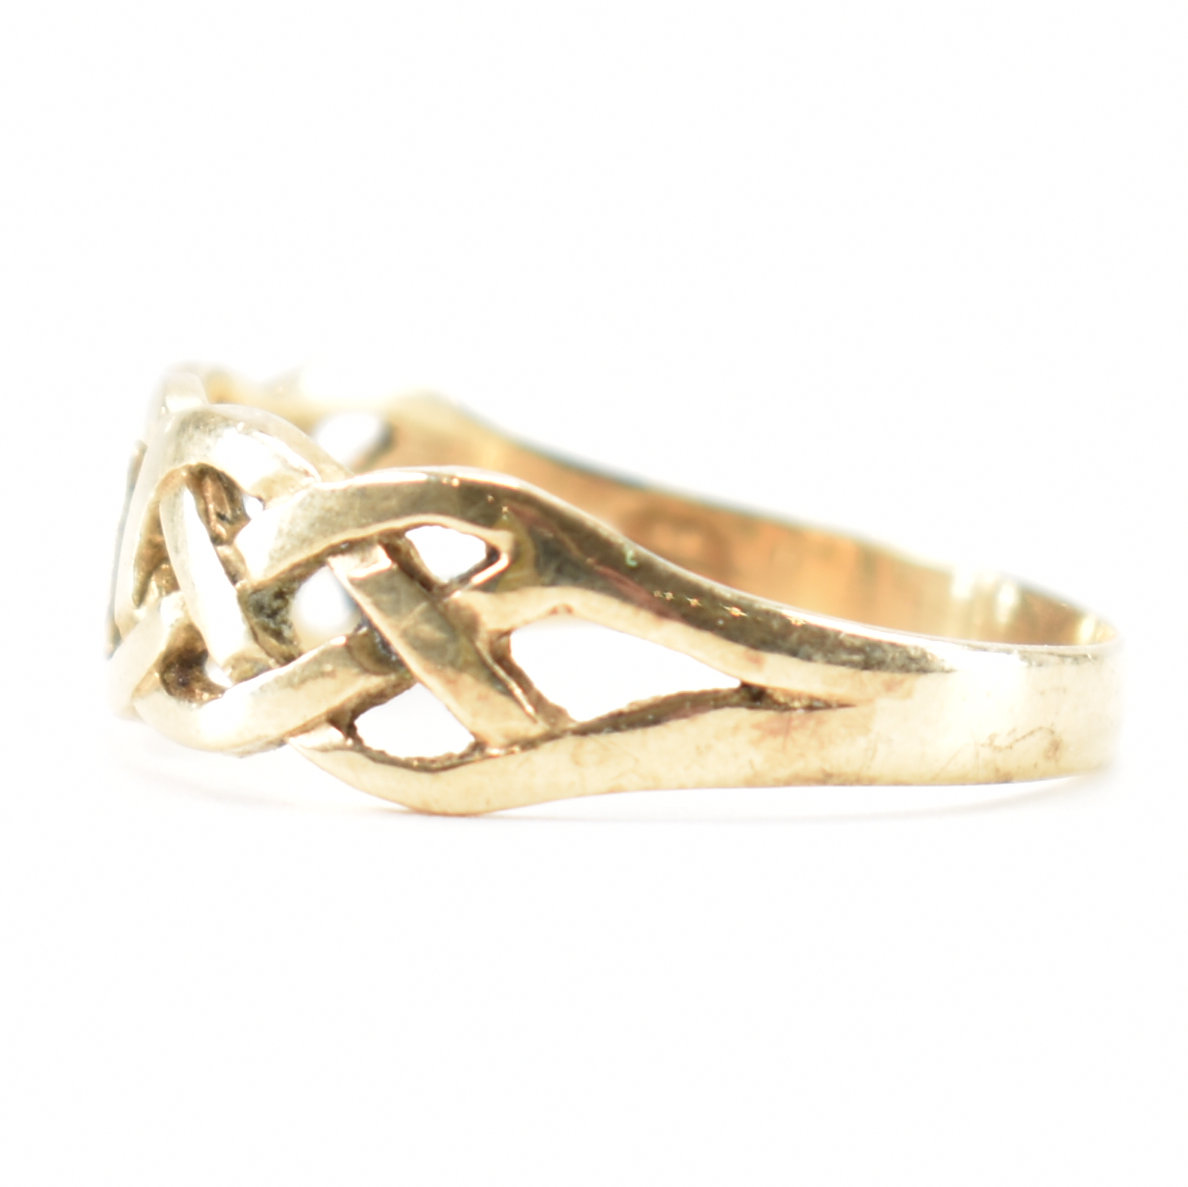 HALLMARKED 9CT GOLD CELTIC KNOT RING - Image 2 of 8